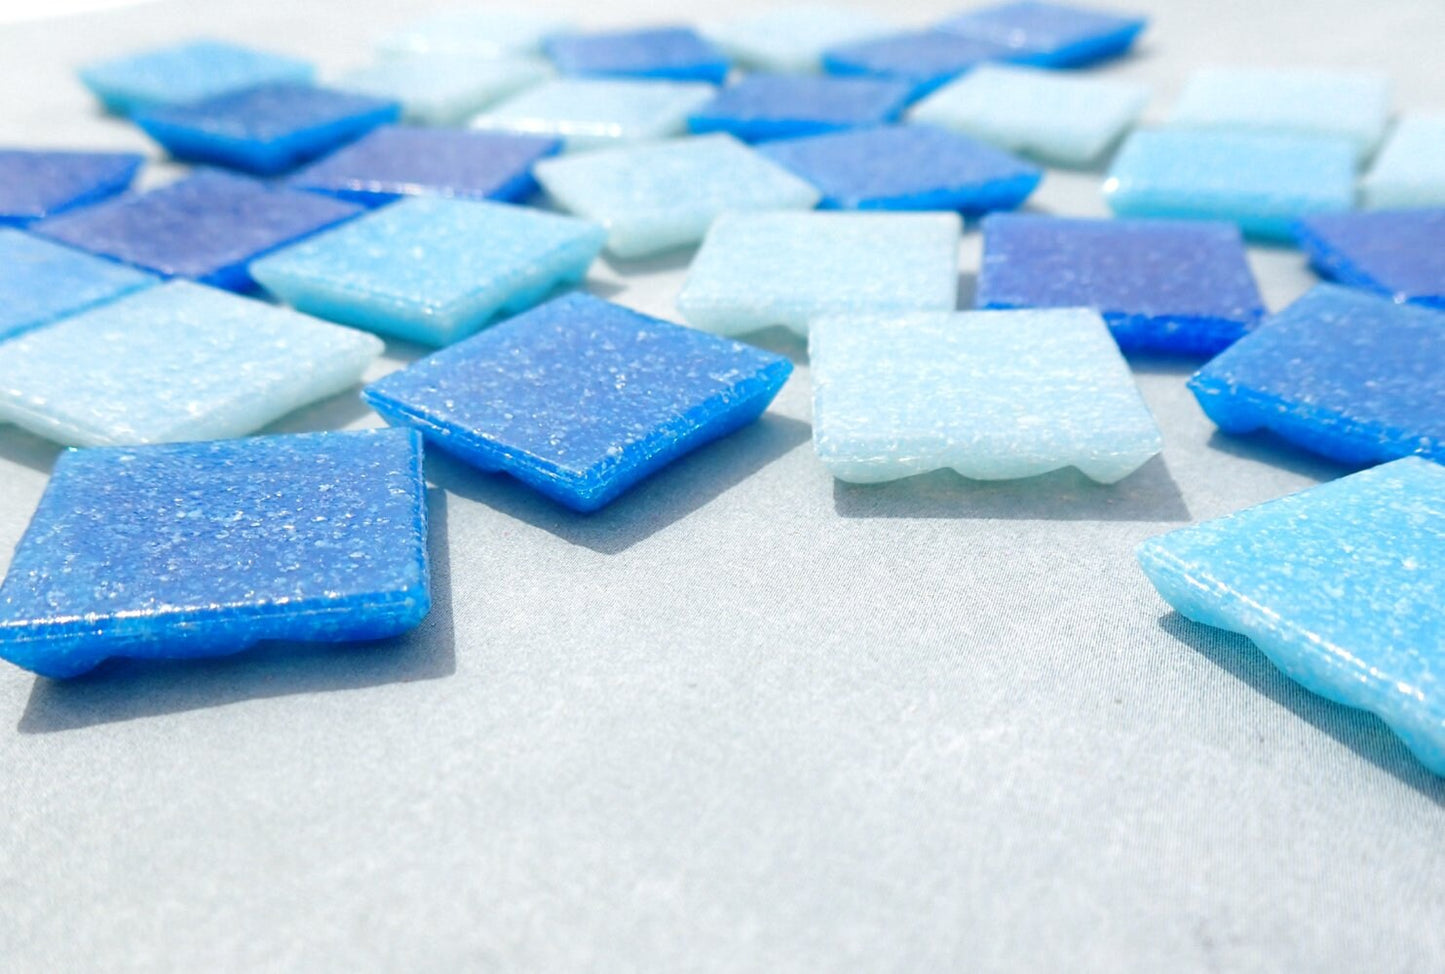 Blue Mix Glass Mosaic Tiles Squares - 20mm - Half Pound of Vitreous Glass Tiles for Craft Projects in an Assortment of Blues